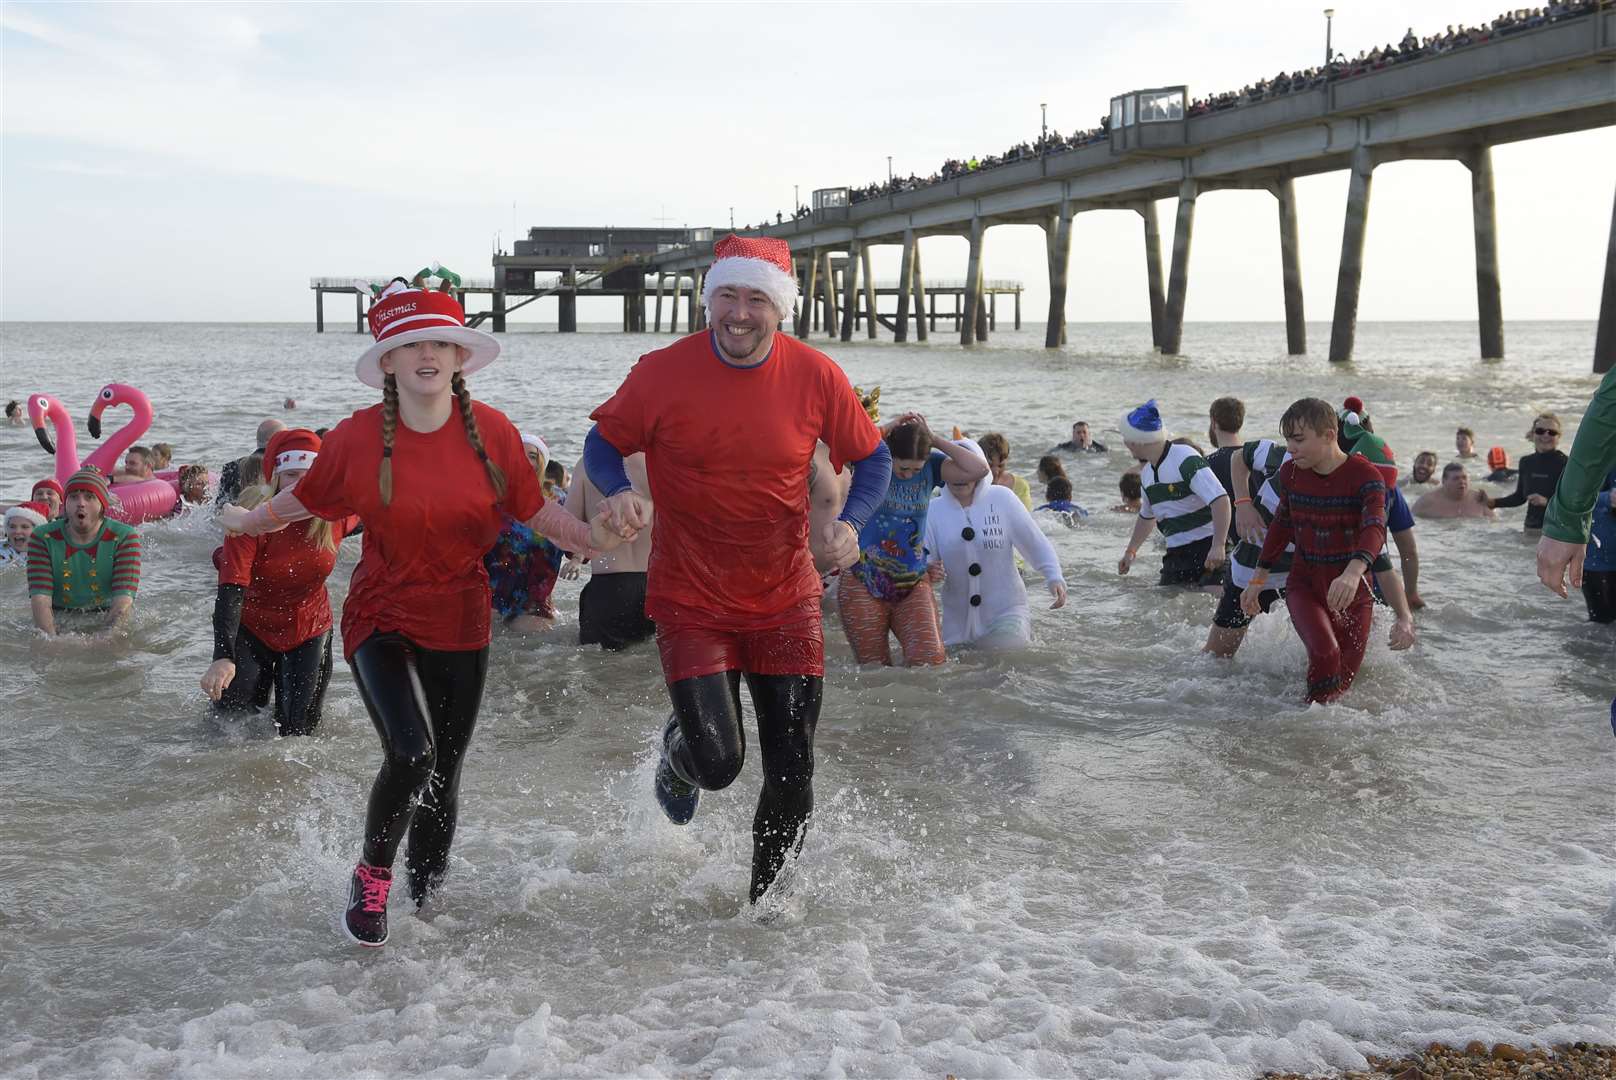 Deal's busy seafront during a Boxing Day dip